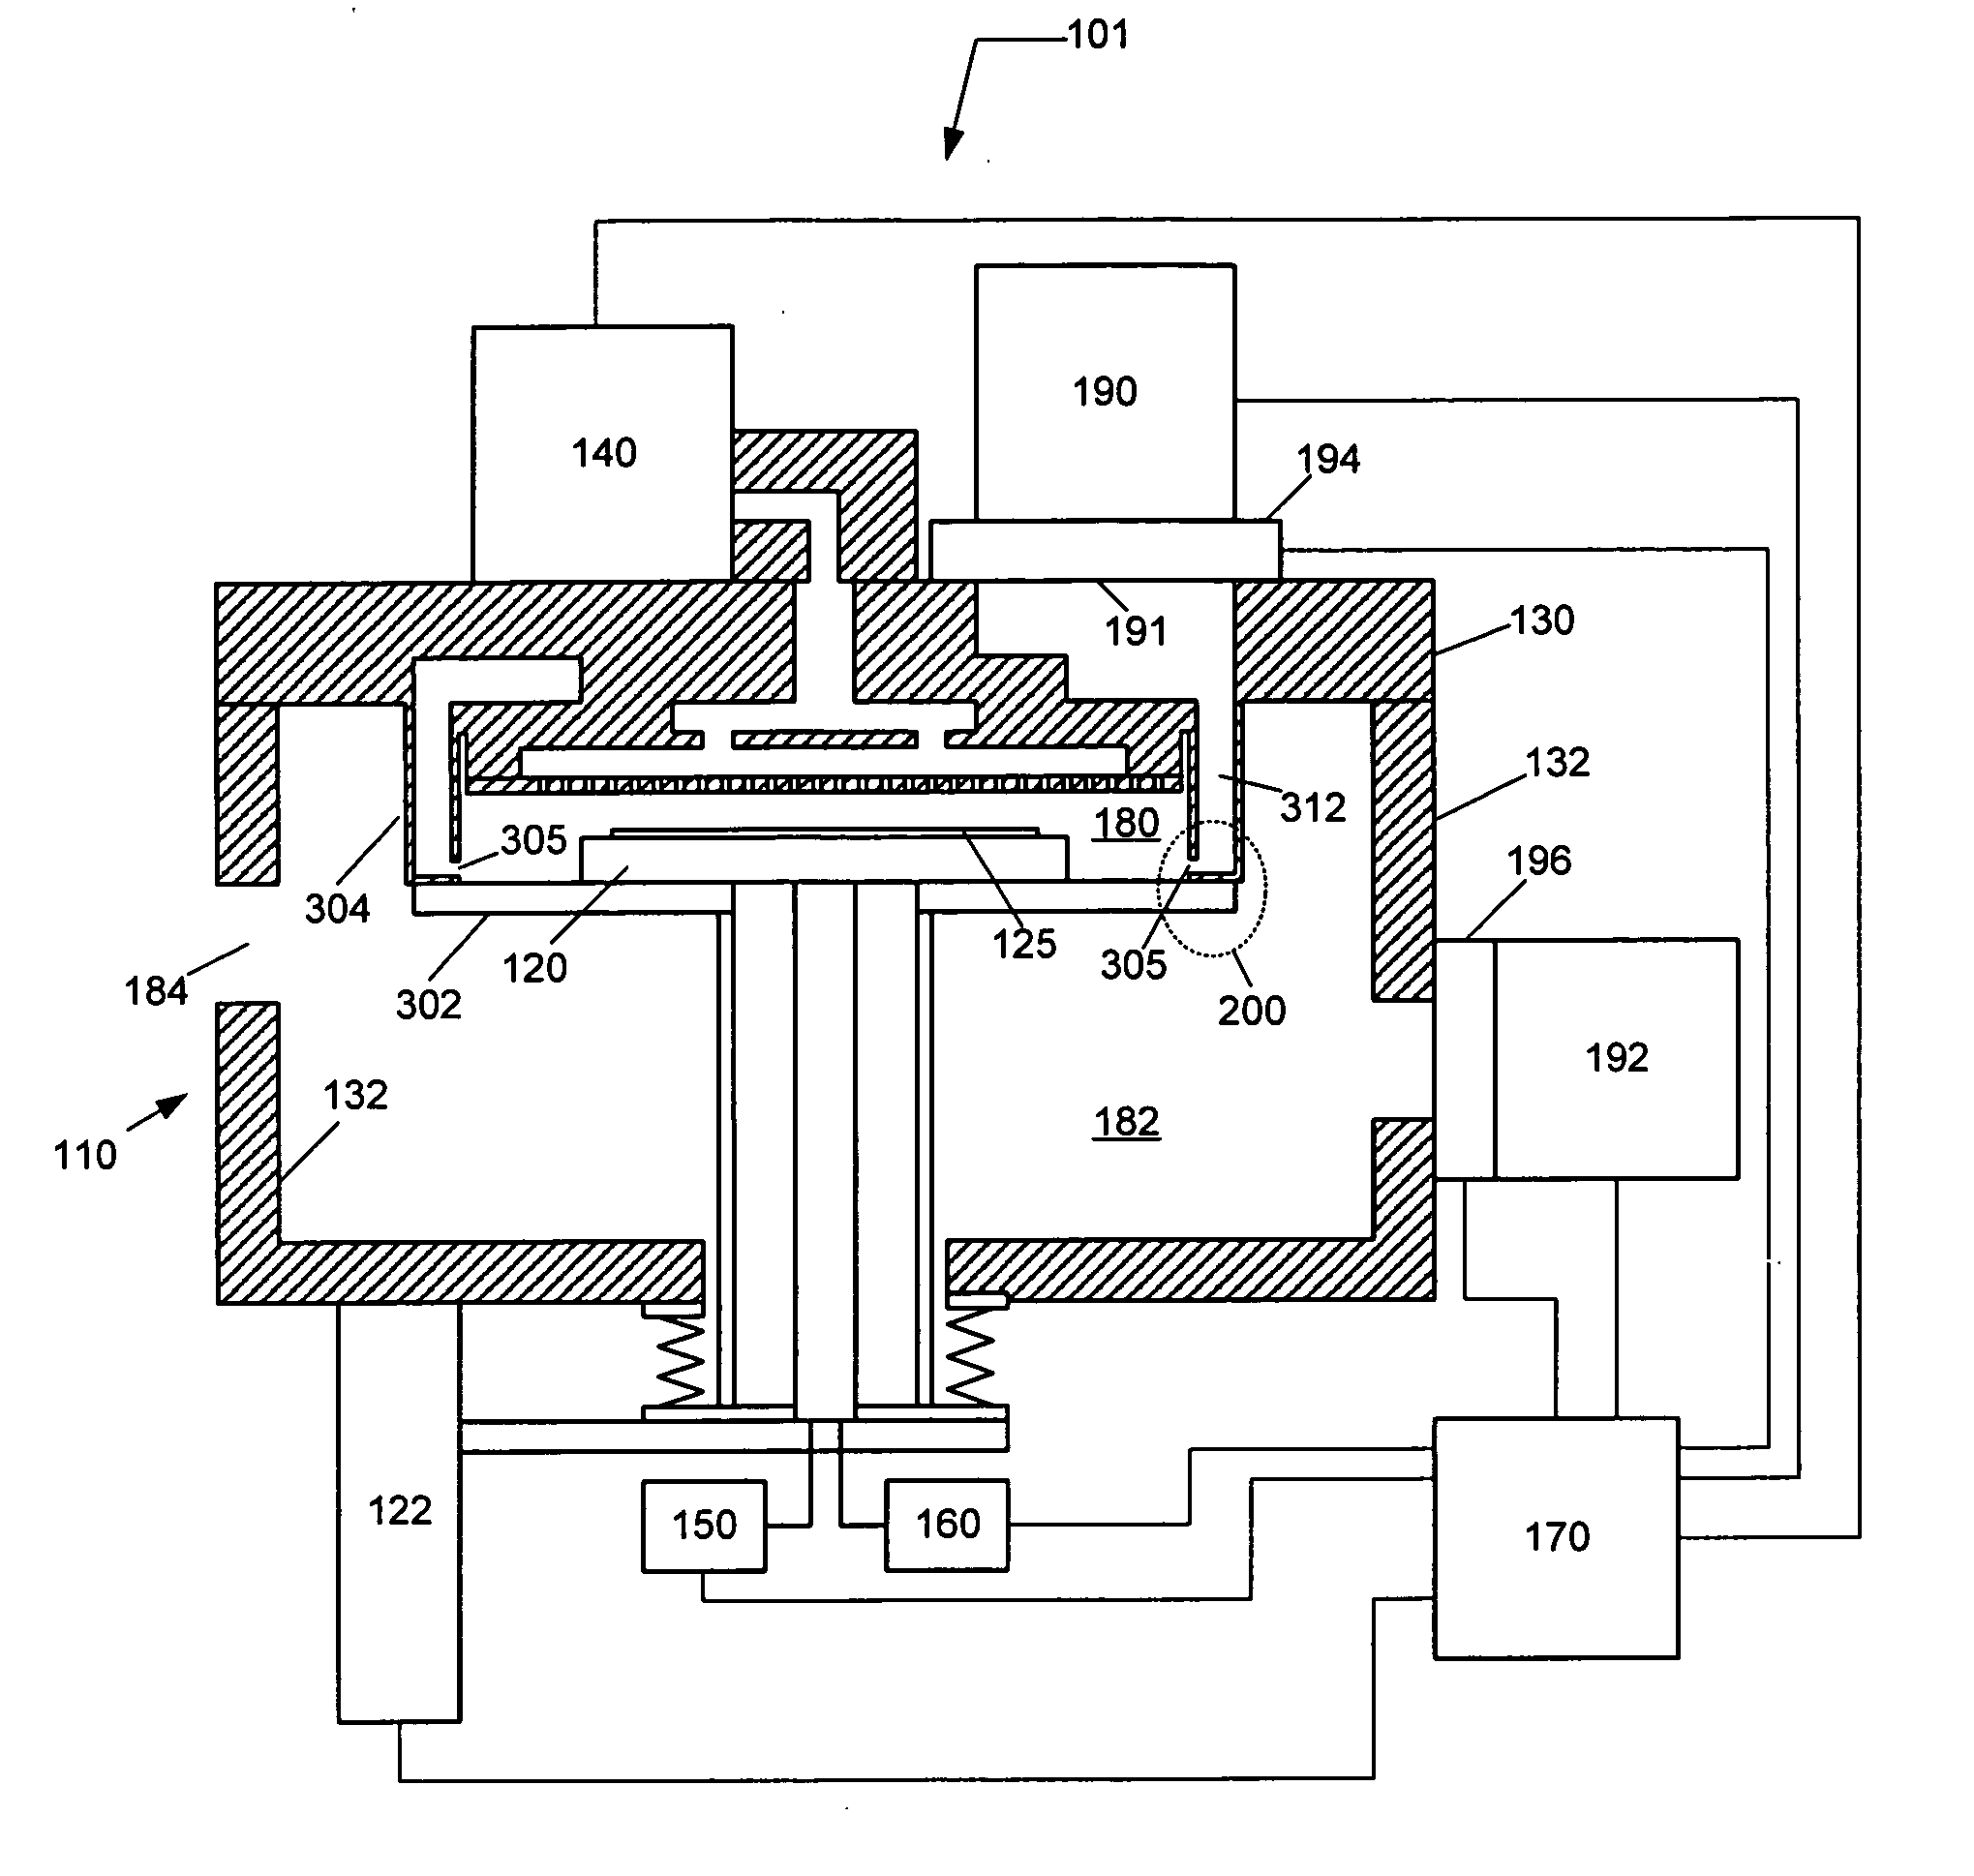 Apparatus for thermal and plasma enhanced vapor deposition and method of operating